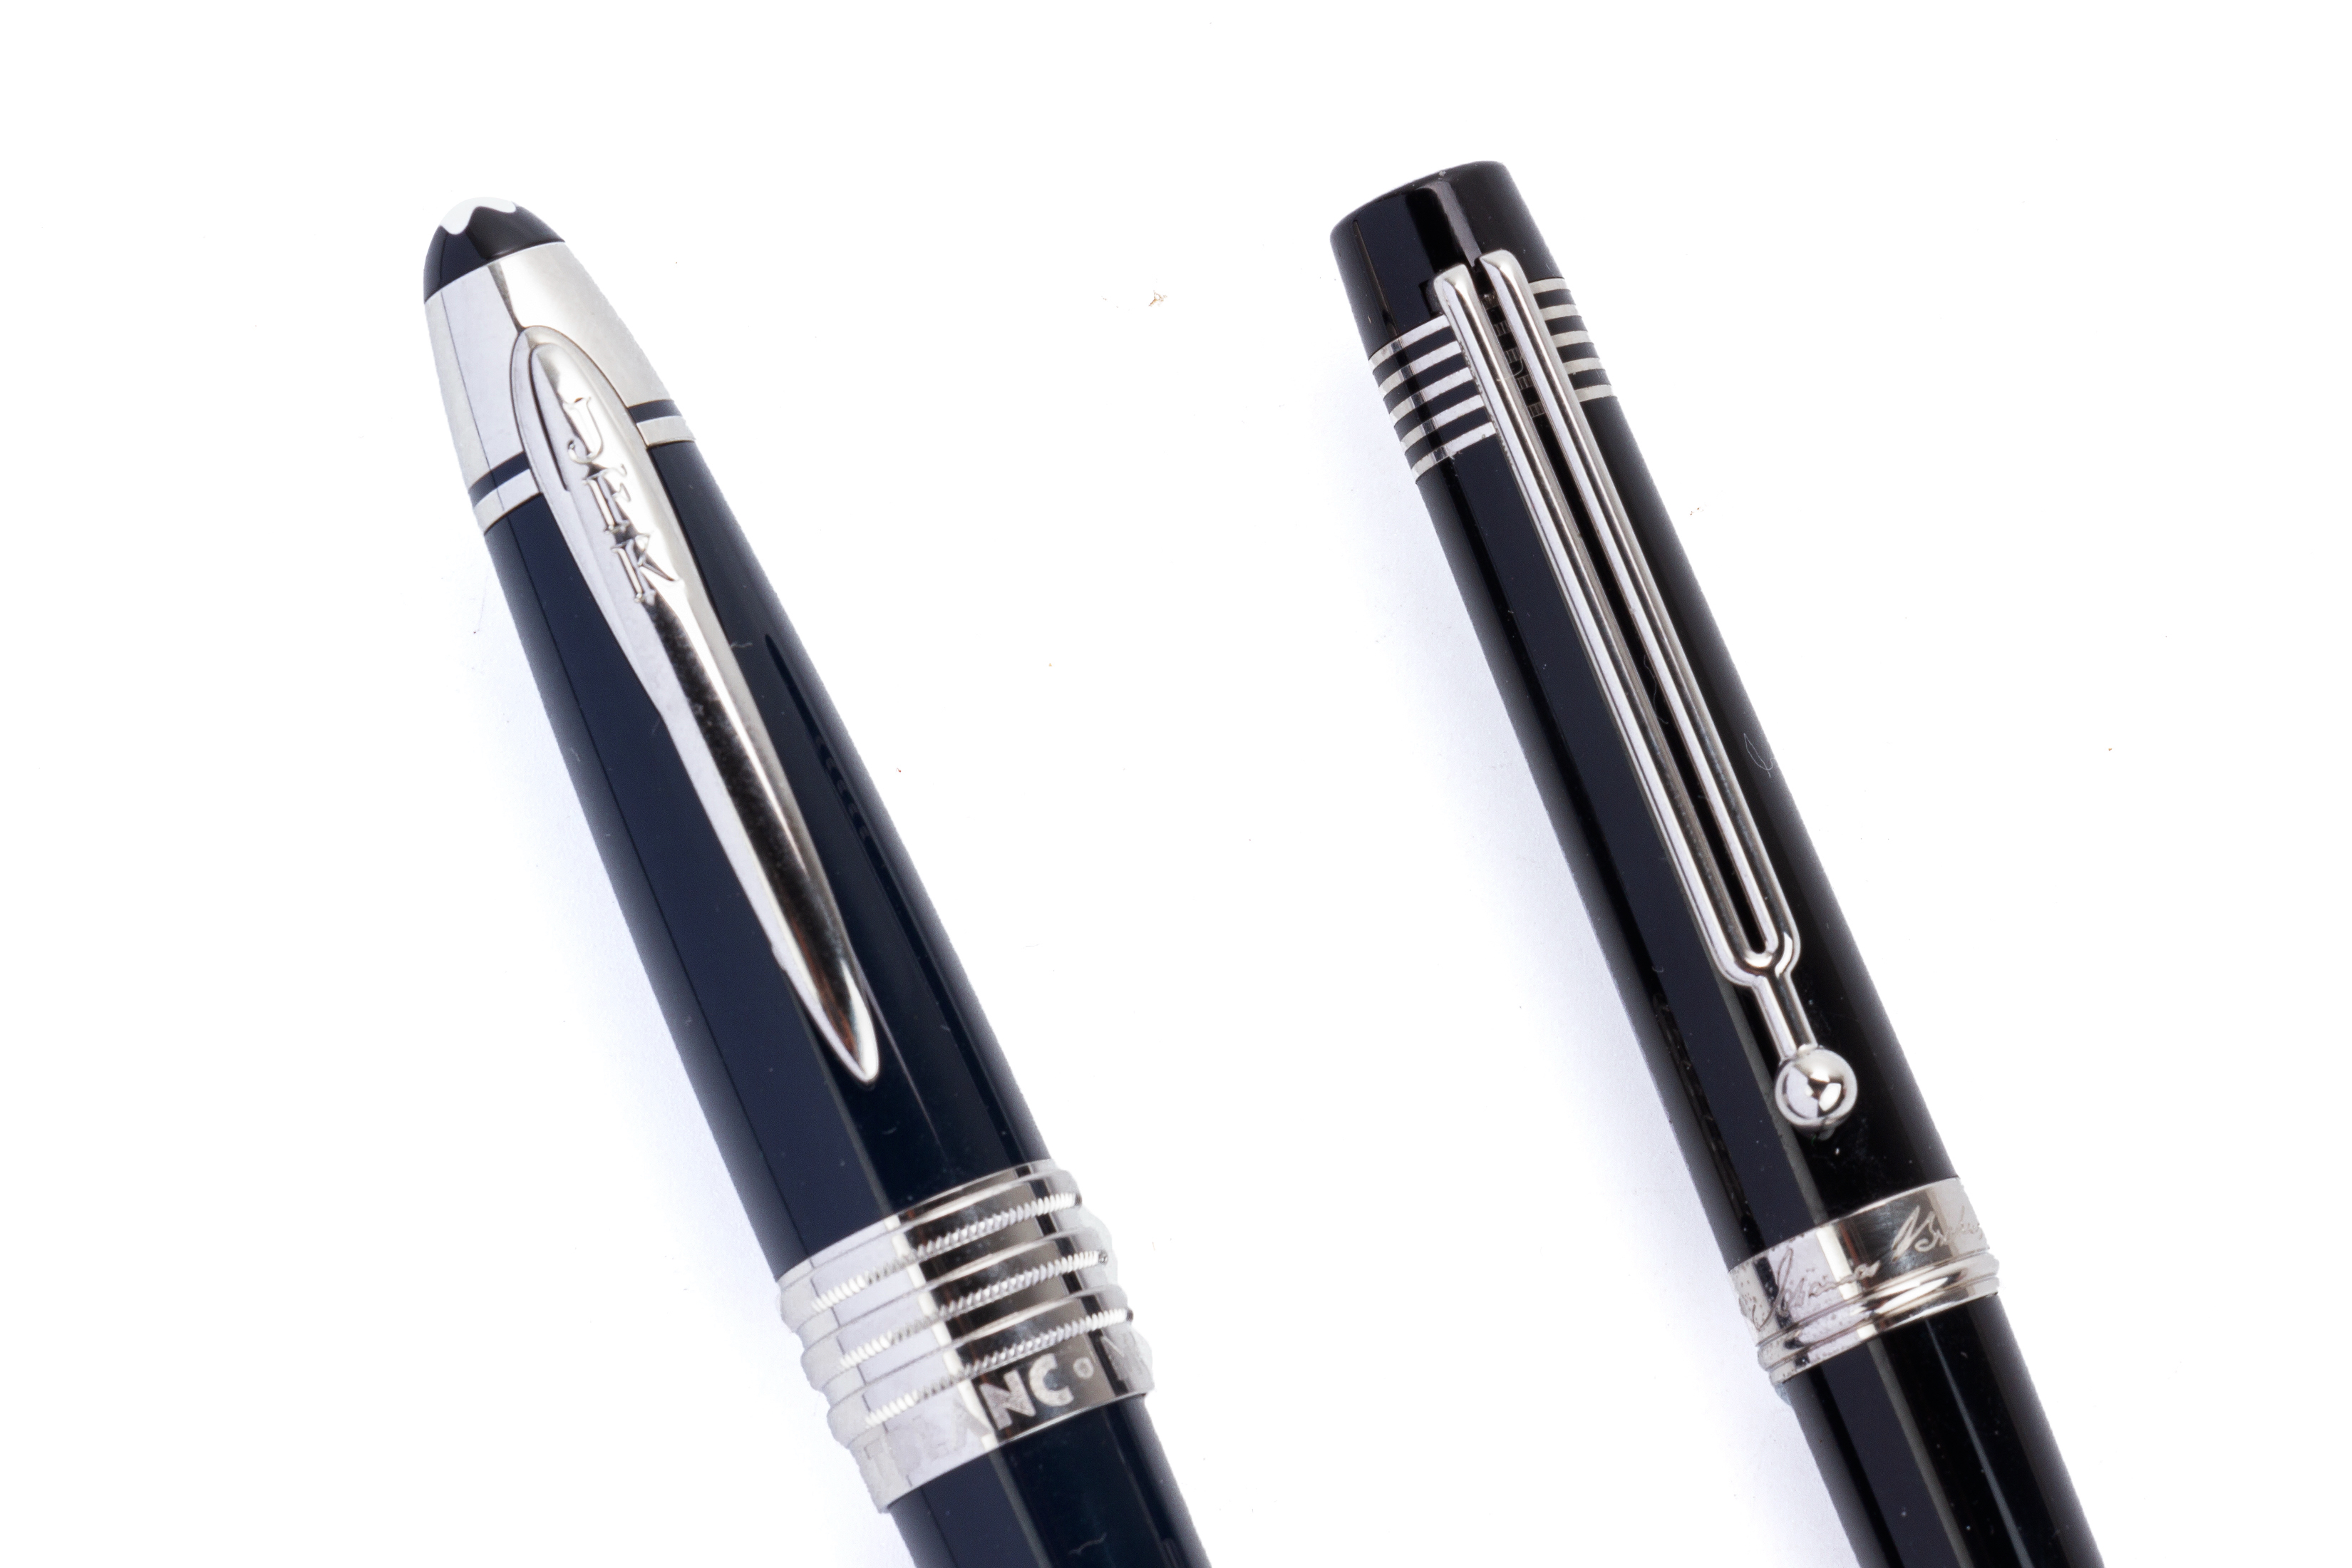 TWO MONTBLANC SPECIAL EDITION BALLPOINT PENS - Image 3 of 3